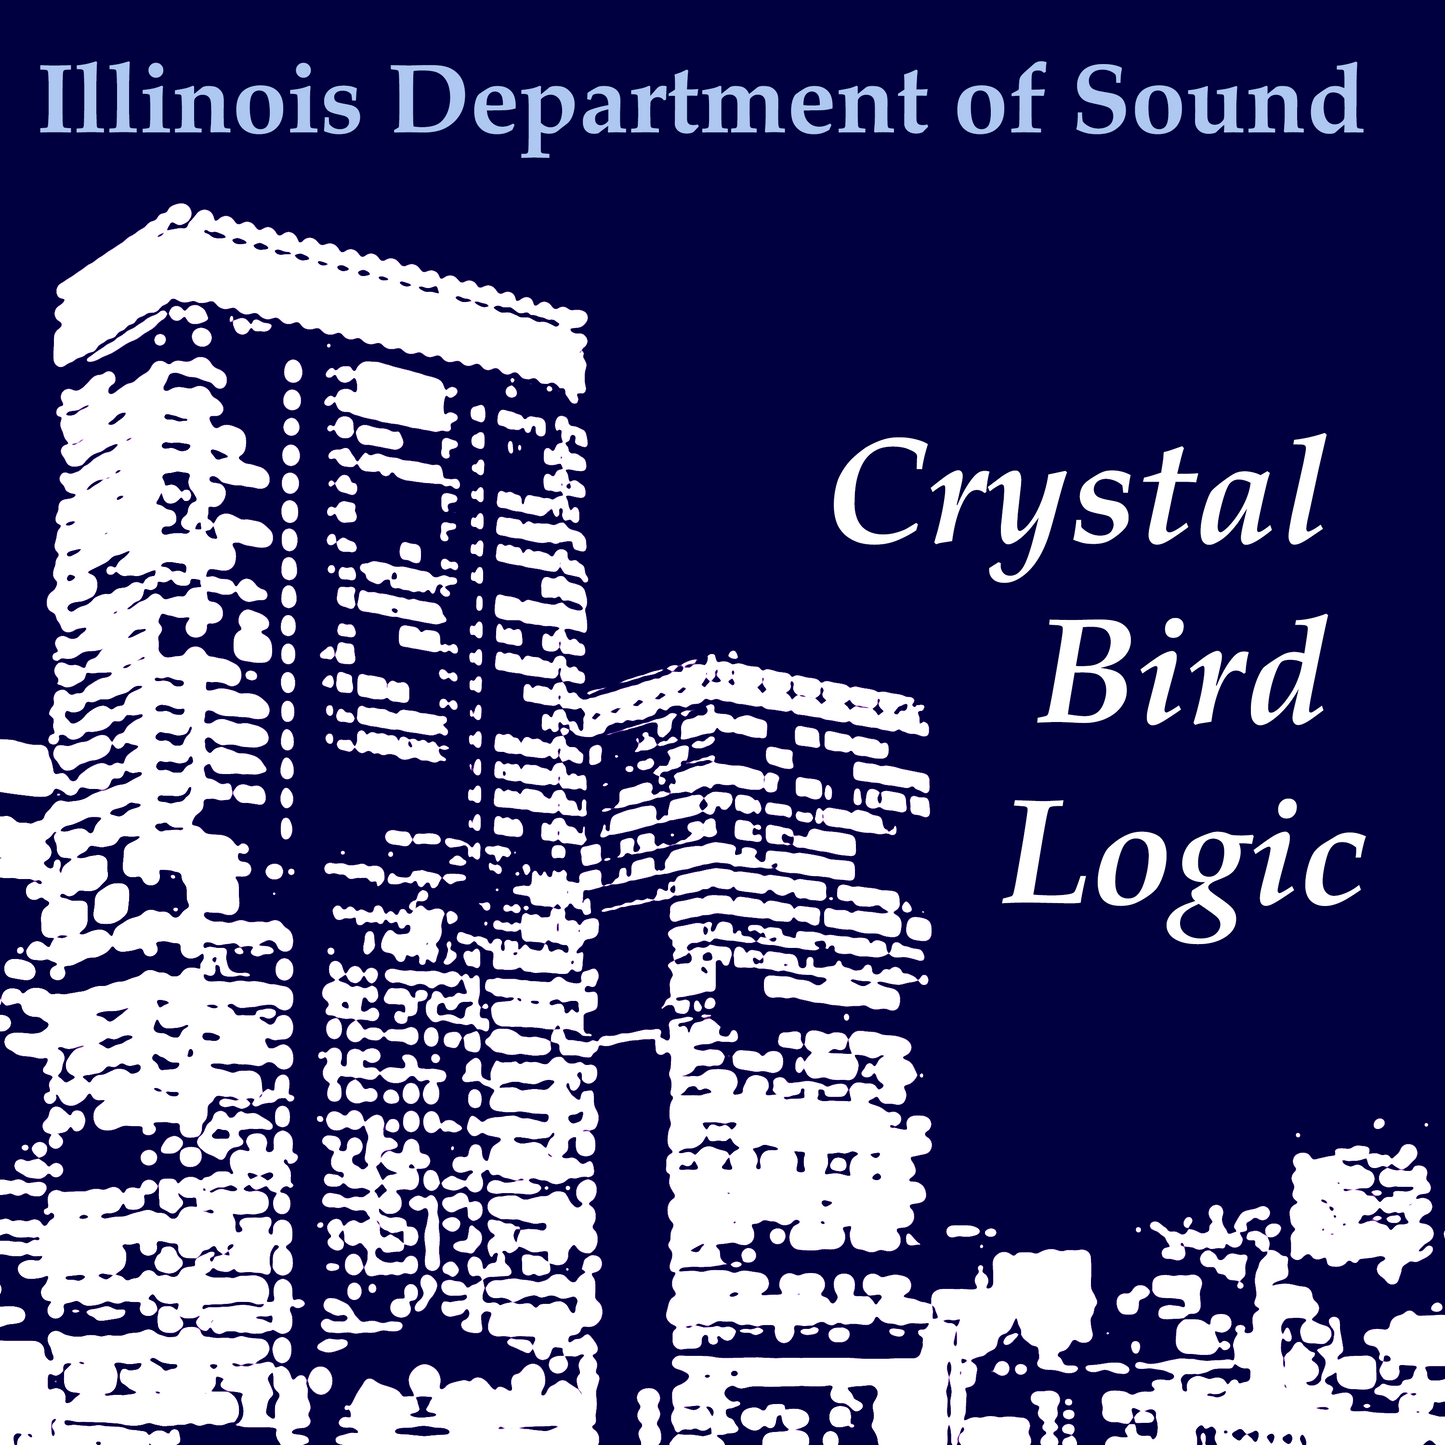 Crystal Bird Logic by Illinois Department of Sound high quality MP3 album download